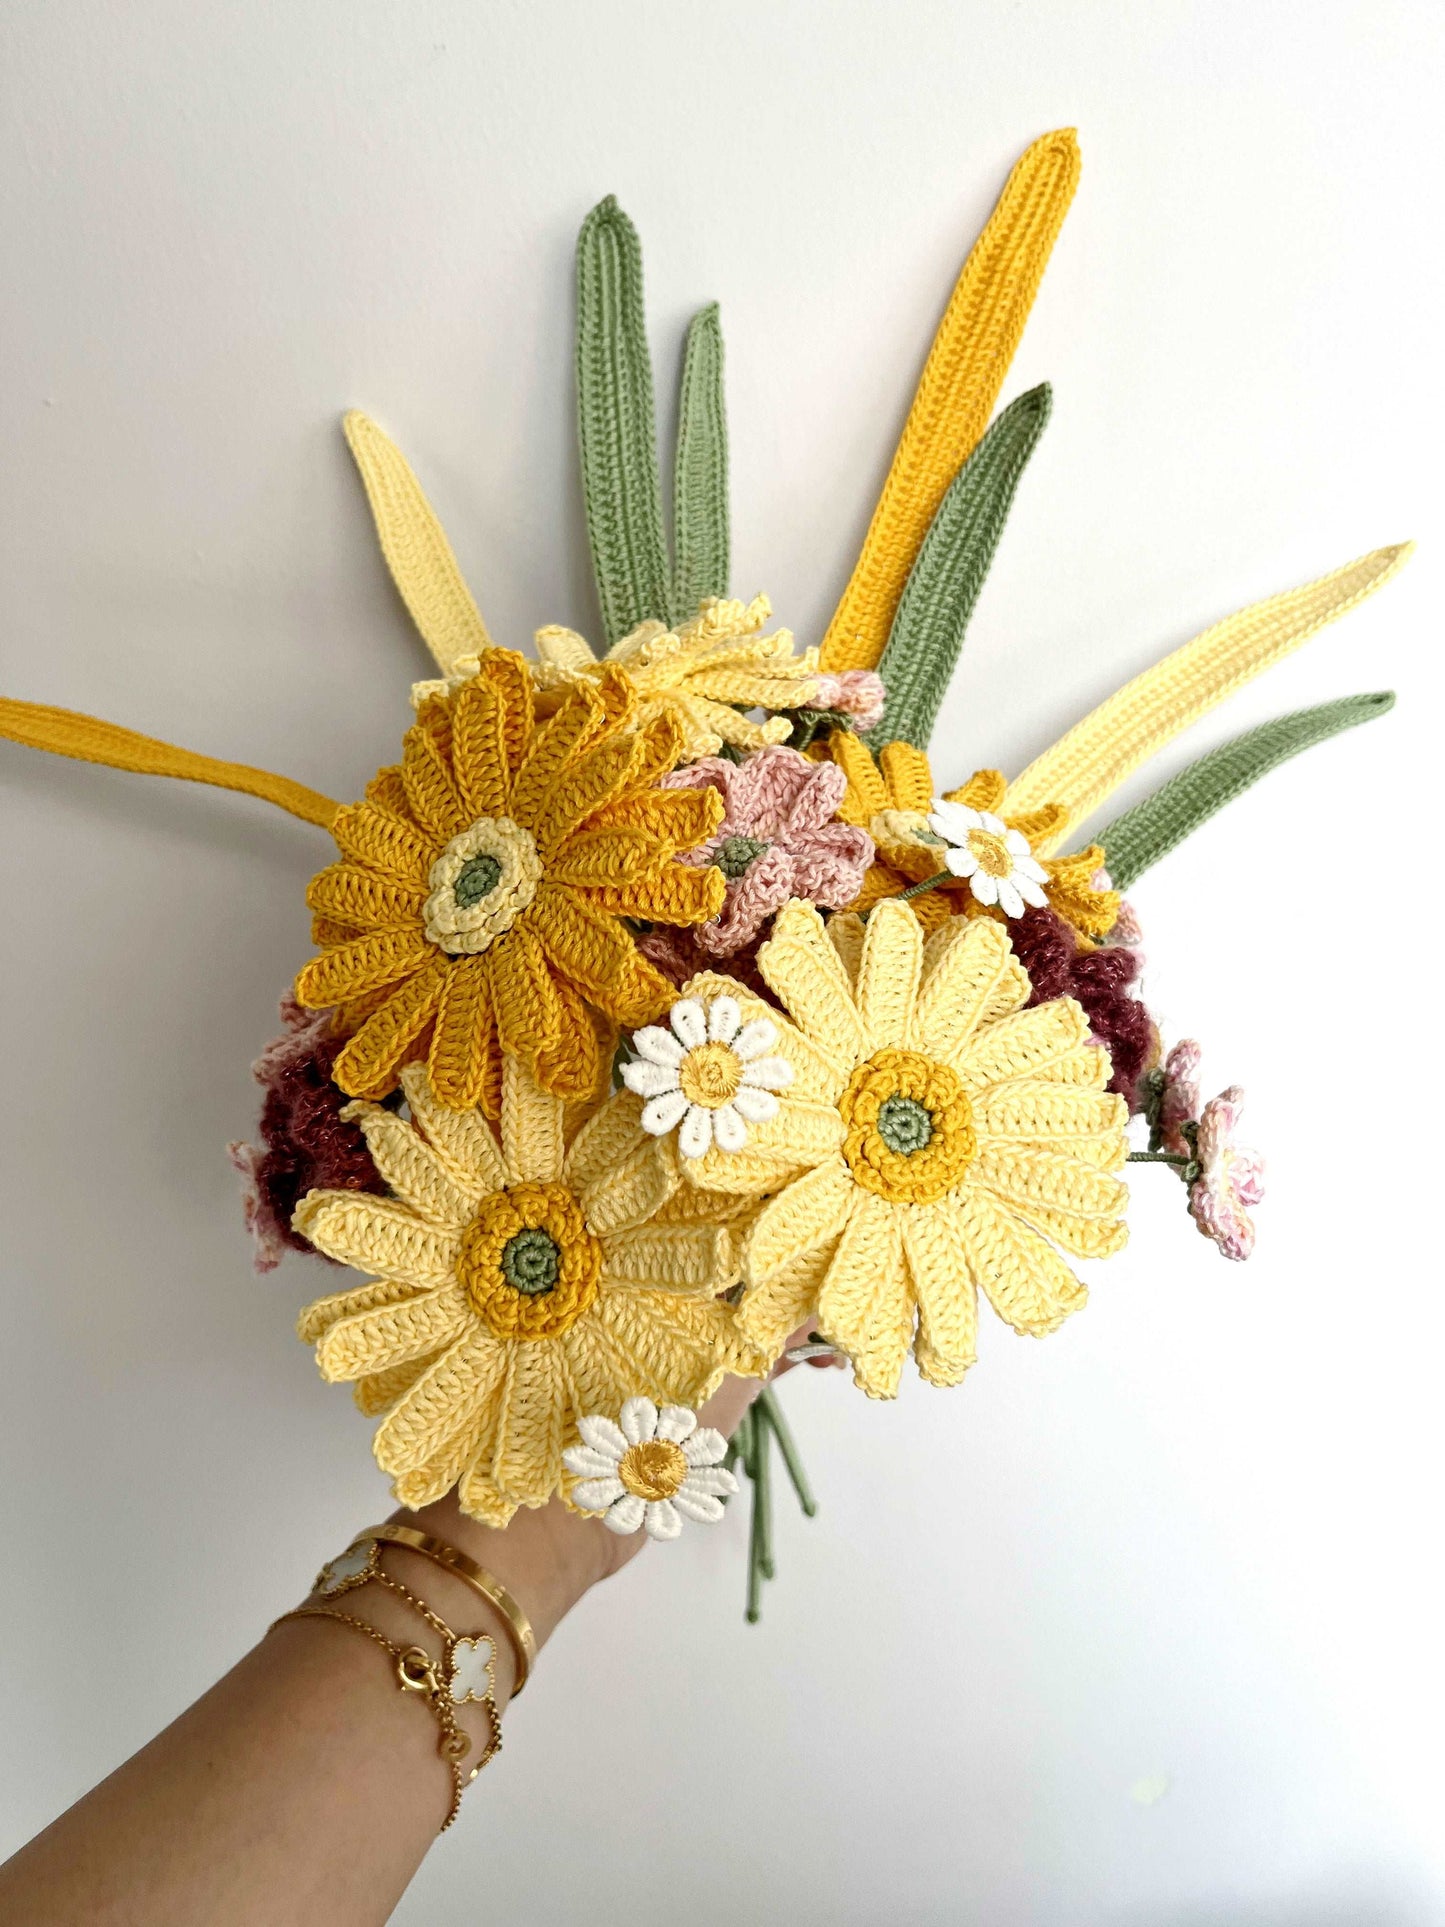 Personalized Handcrafted Yellow Daisy Bouquet for Loved Ones